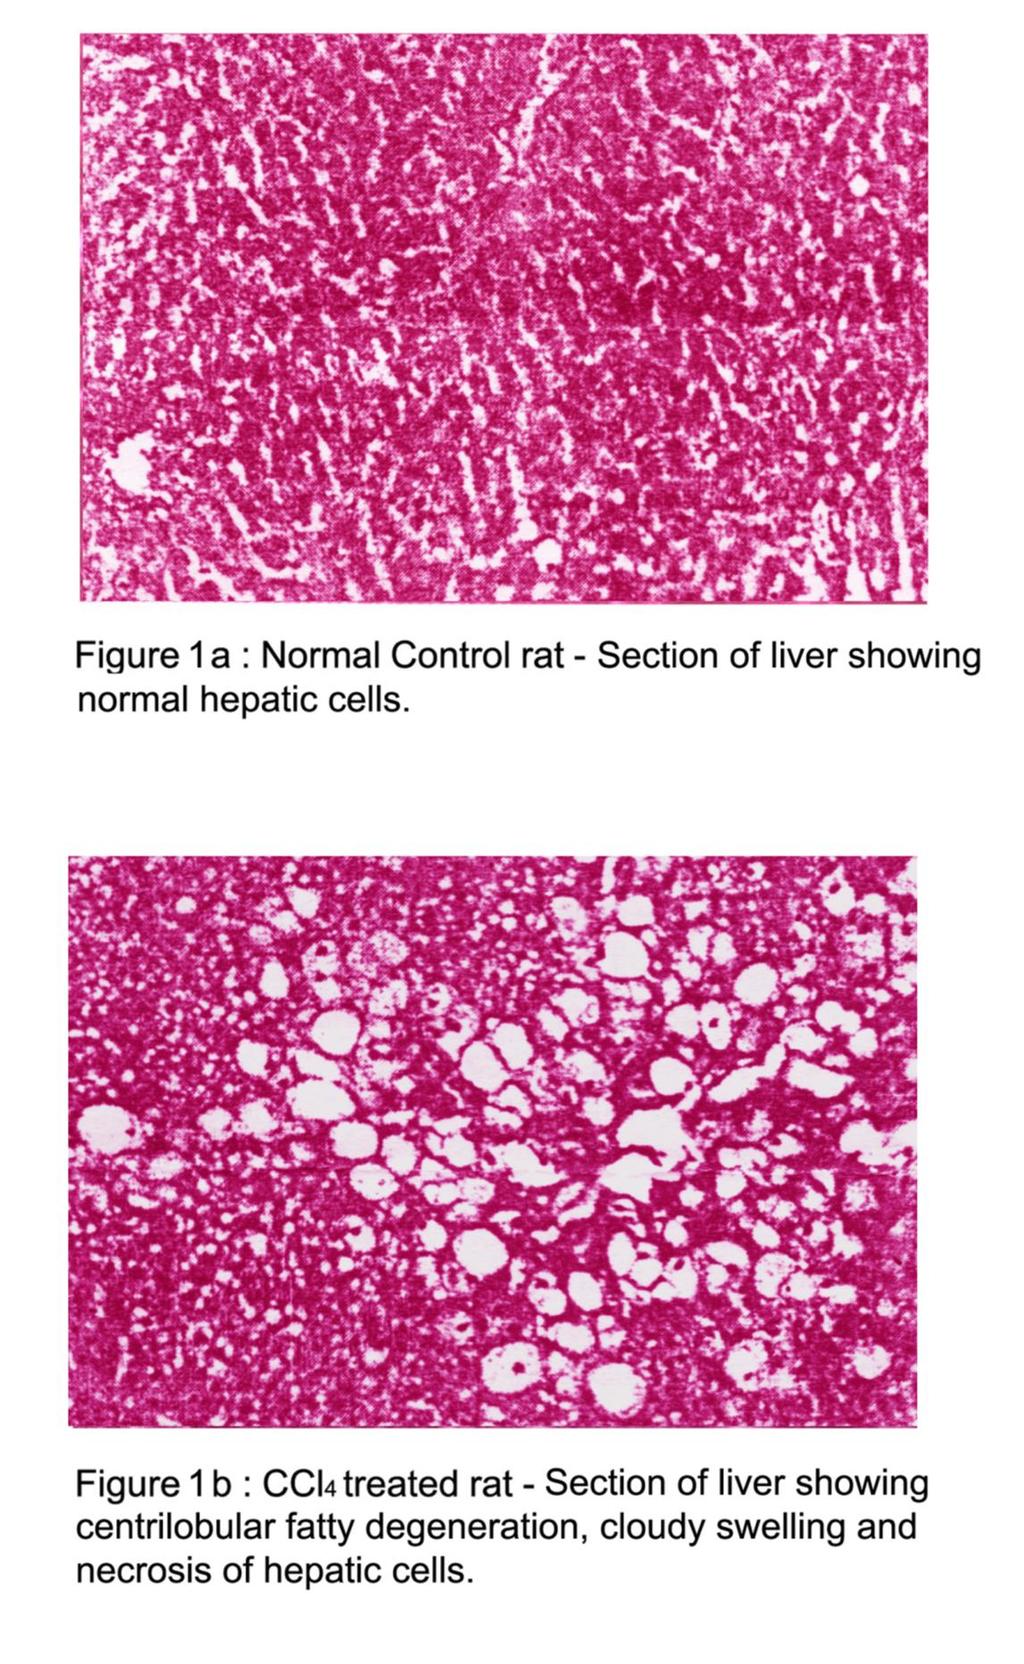 Fig 2a: Section of the rat liver (normal control).